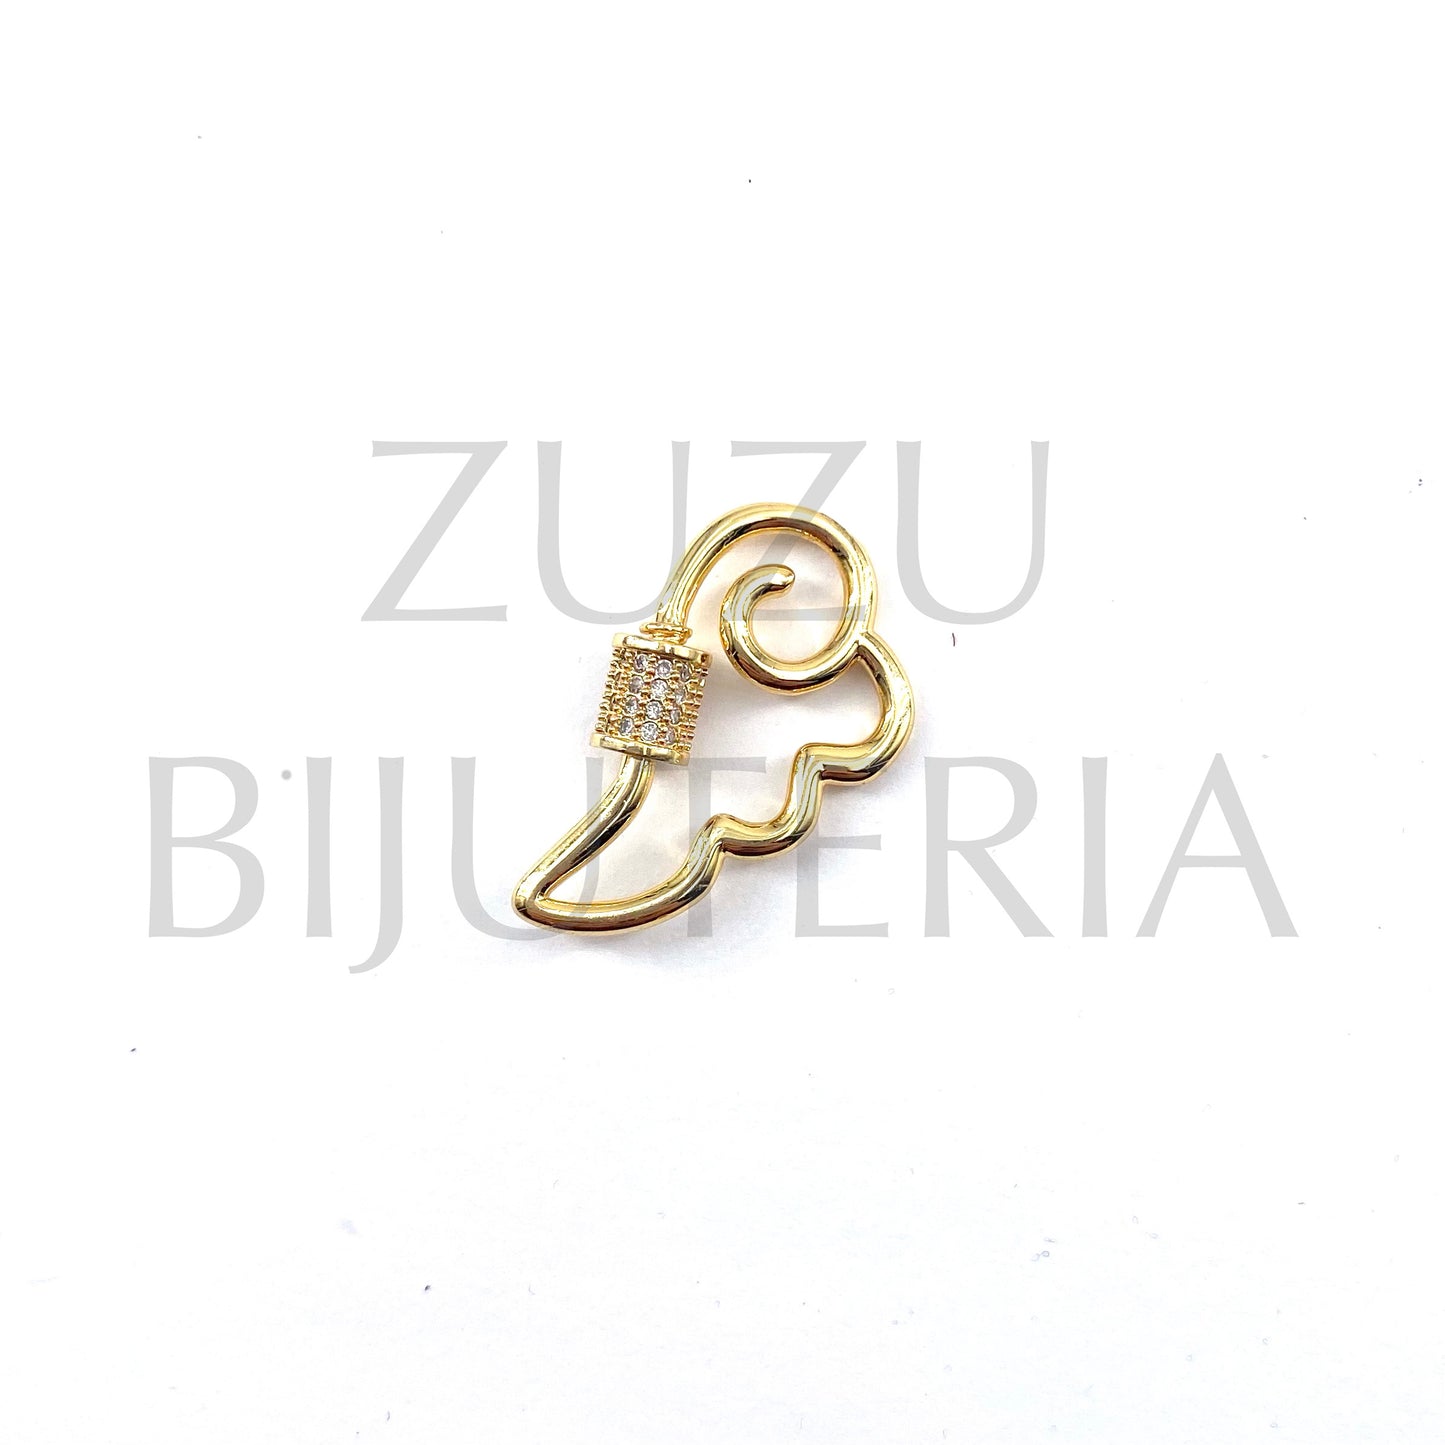 Pendant/Clasp Wing with Zirconia 16mm x 26mm - Brass